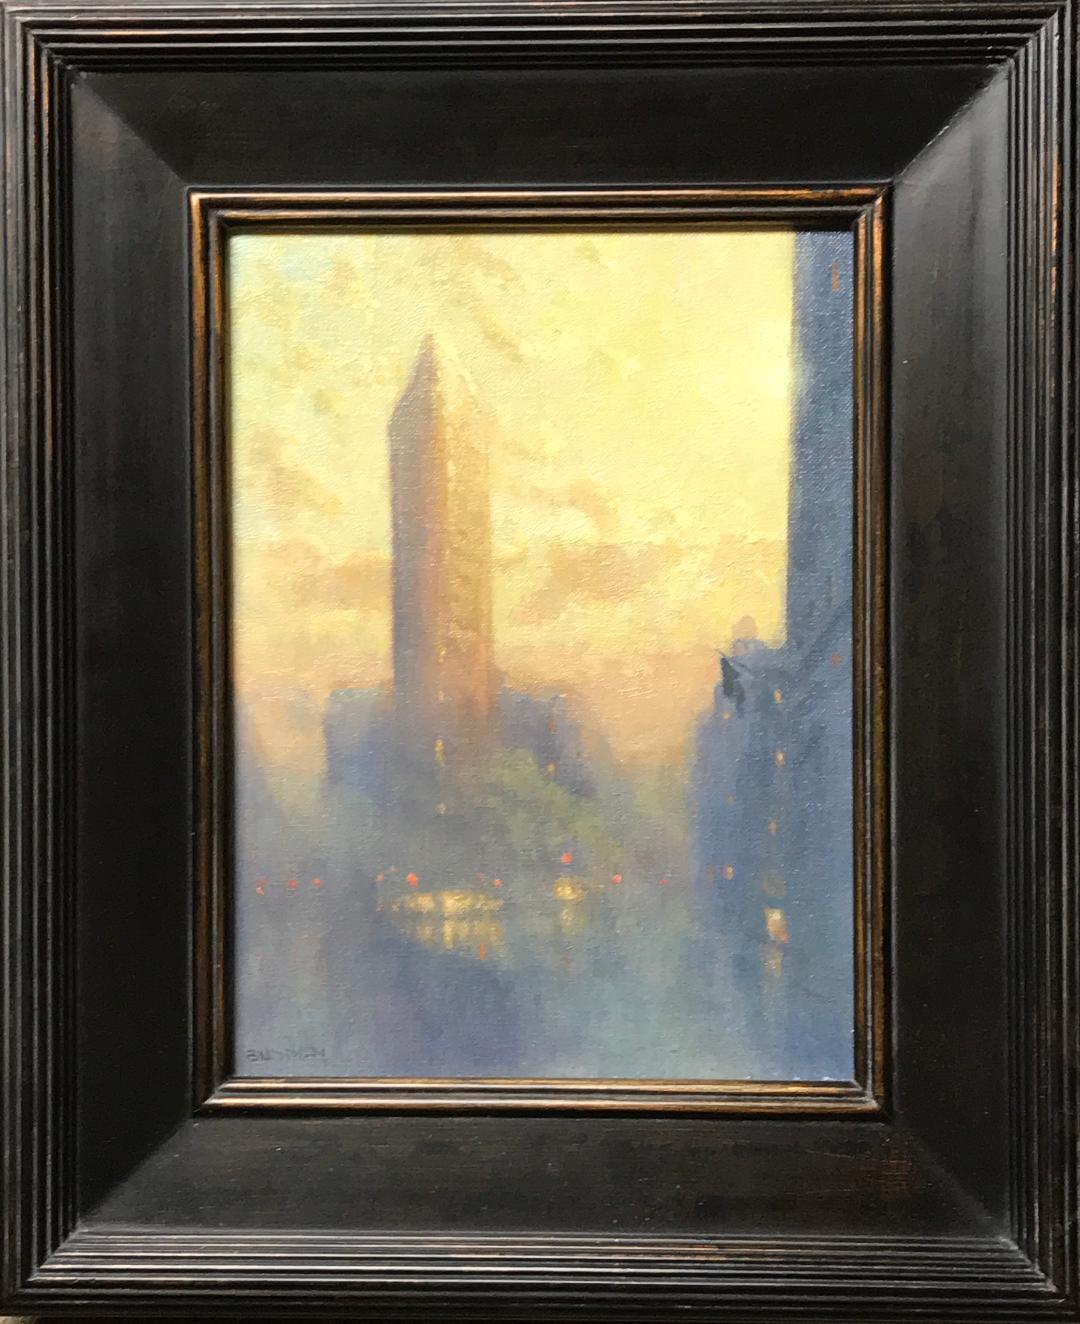 An oil painting on panel by award winning contemporary artist Michael Budden that showcases a view of the Flatiron at sunrise in  New York City. Painting image measure 12 x 9 unframed and 18.5 x 14.5 framed as is.
ARTIST'S STATEMENT
I have been in